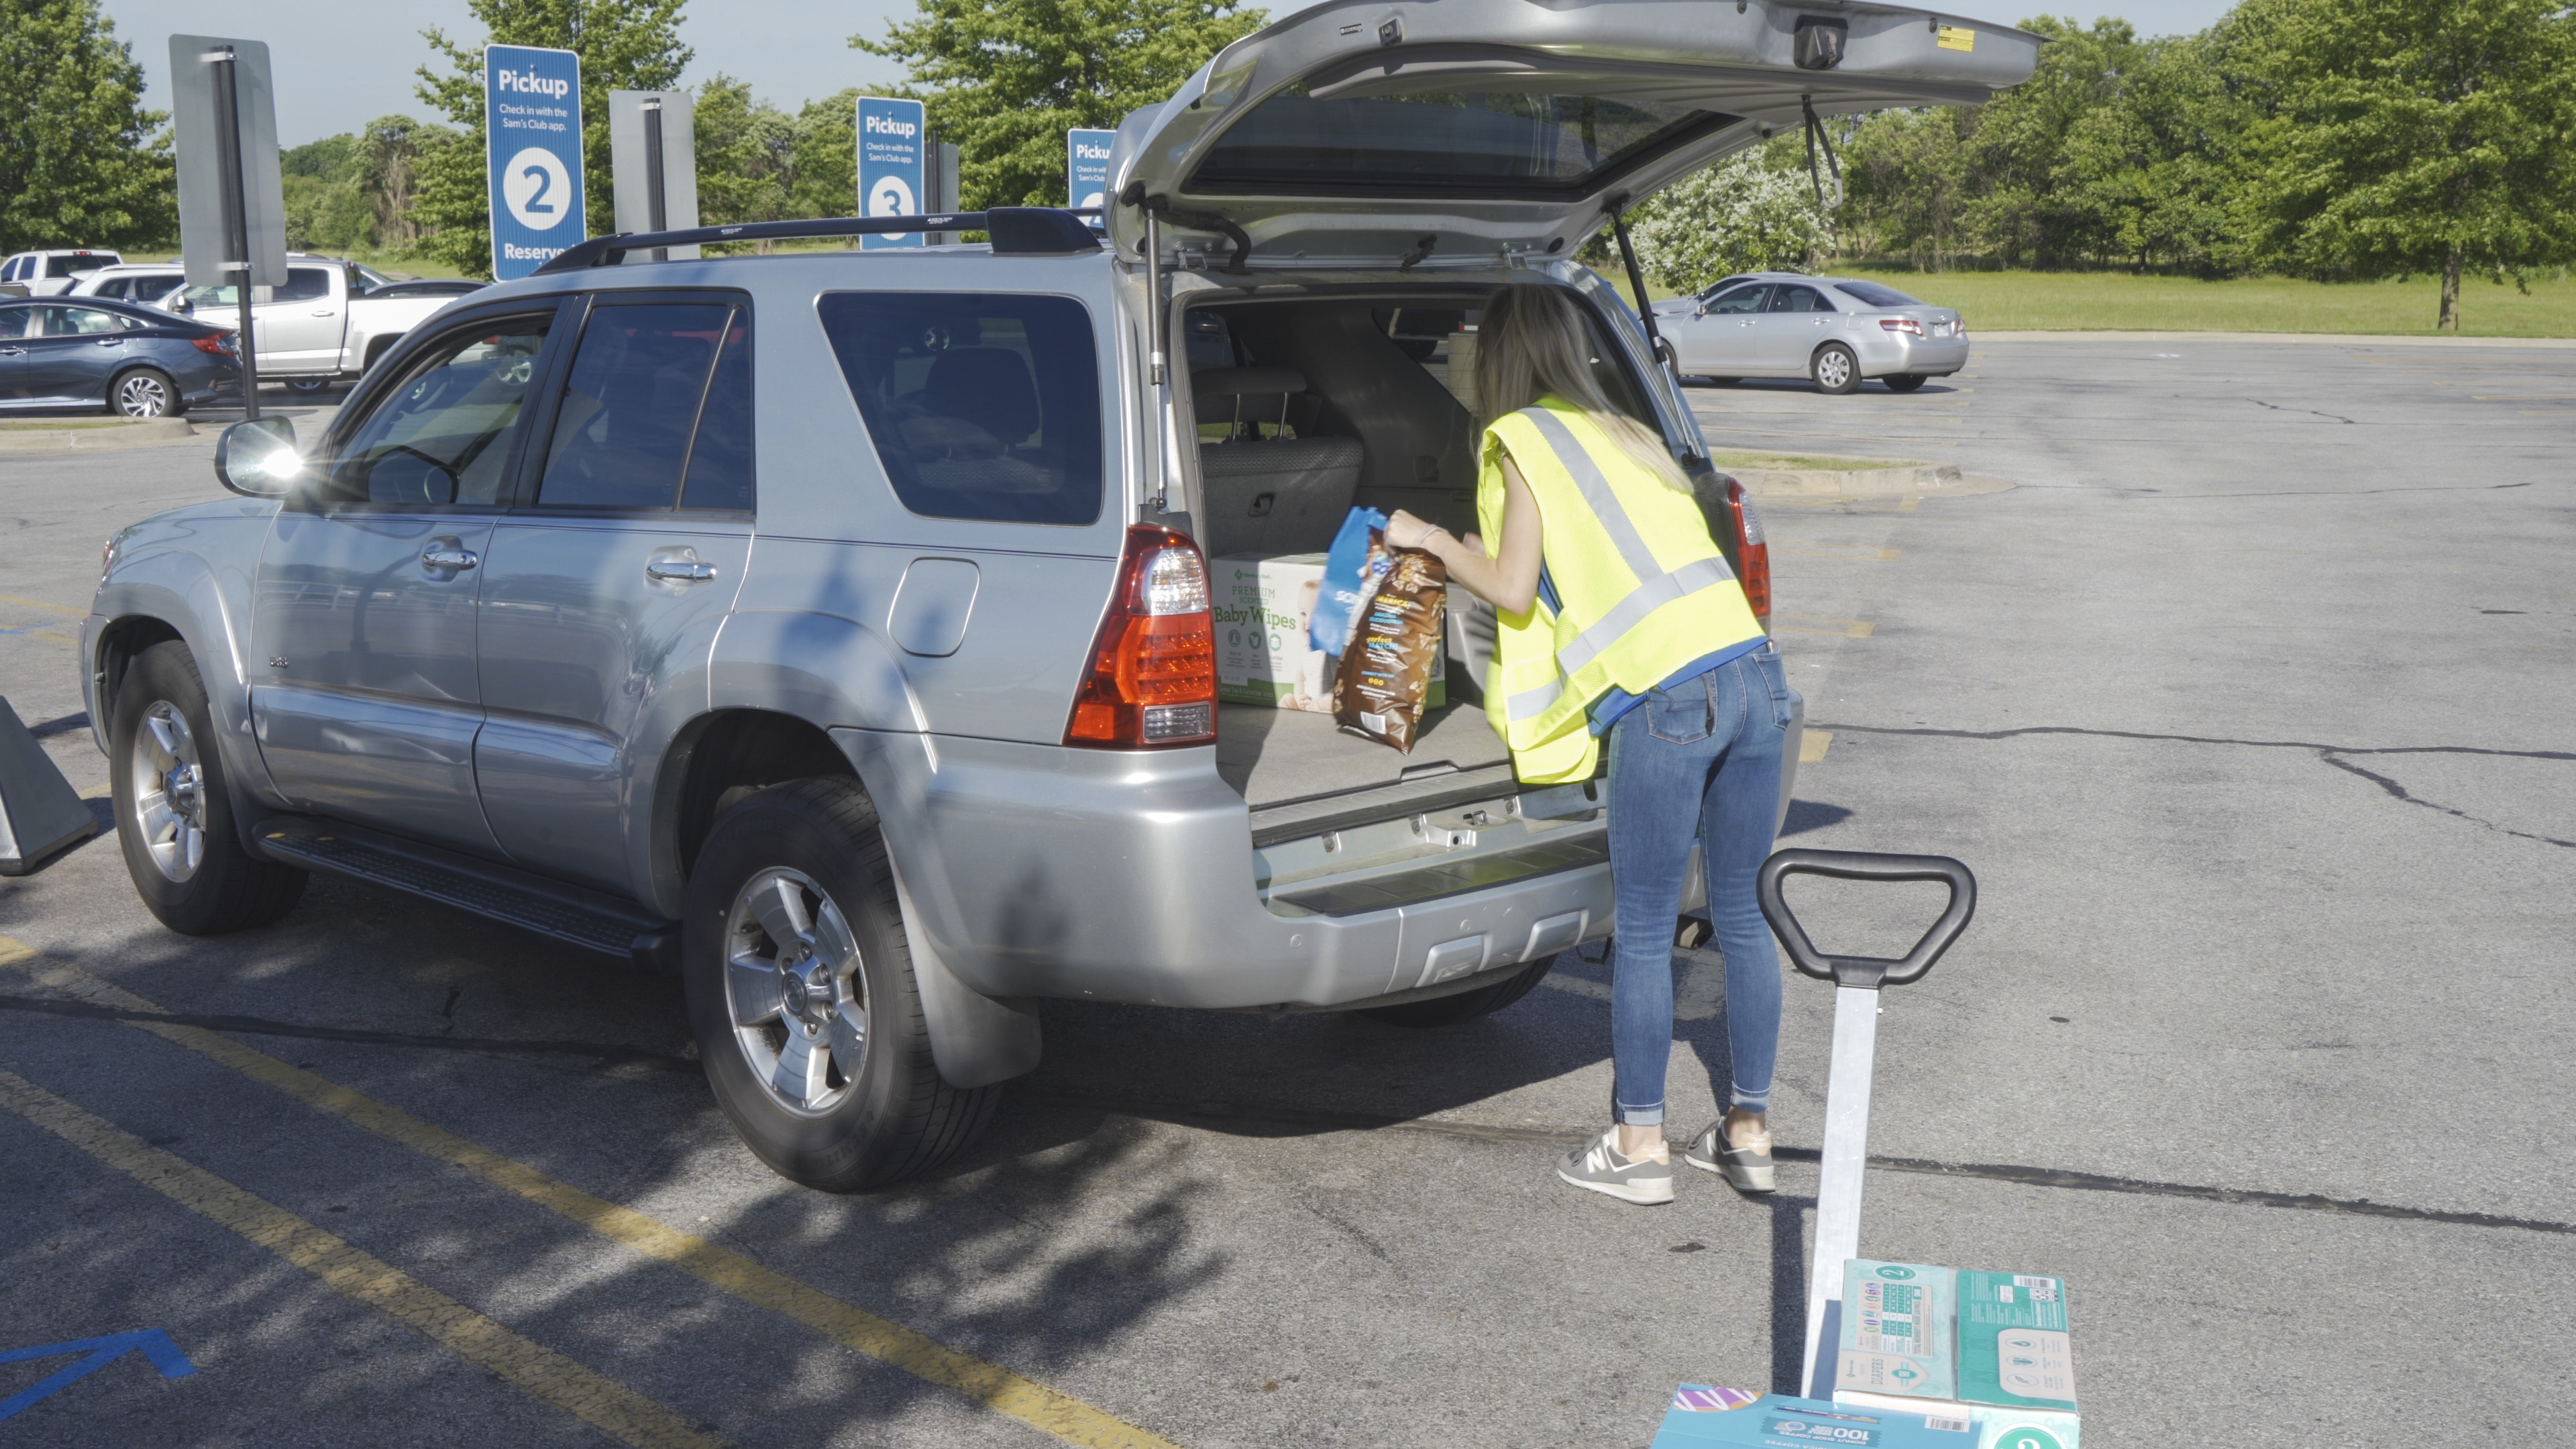 Sam's Club goes chainwide with curbside pickup | Supermarket News